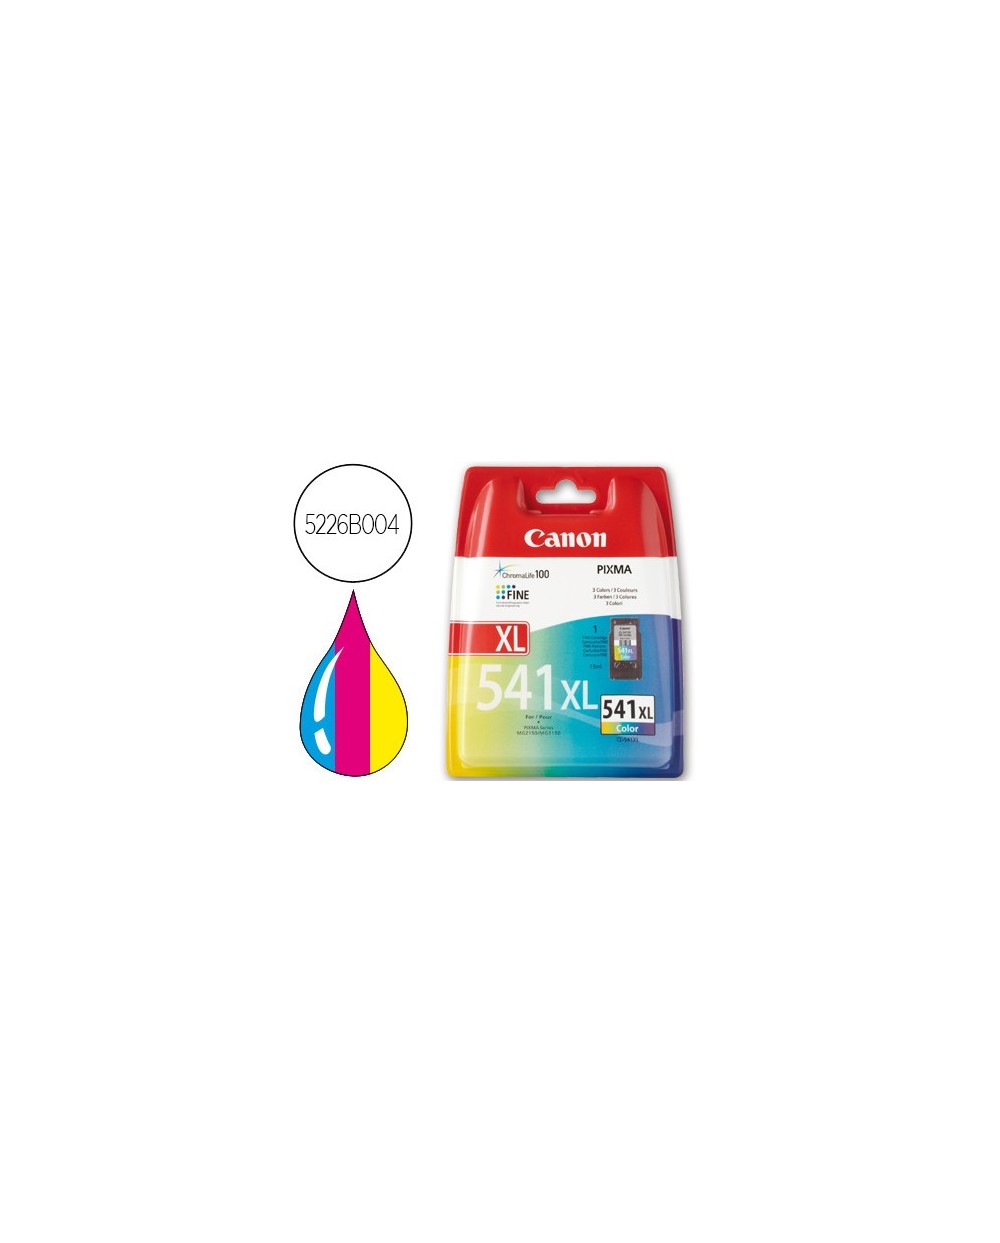 Ink jet canon cl 541xl color pixma mg2150 mg3150